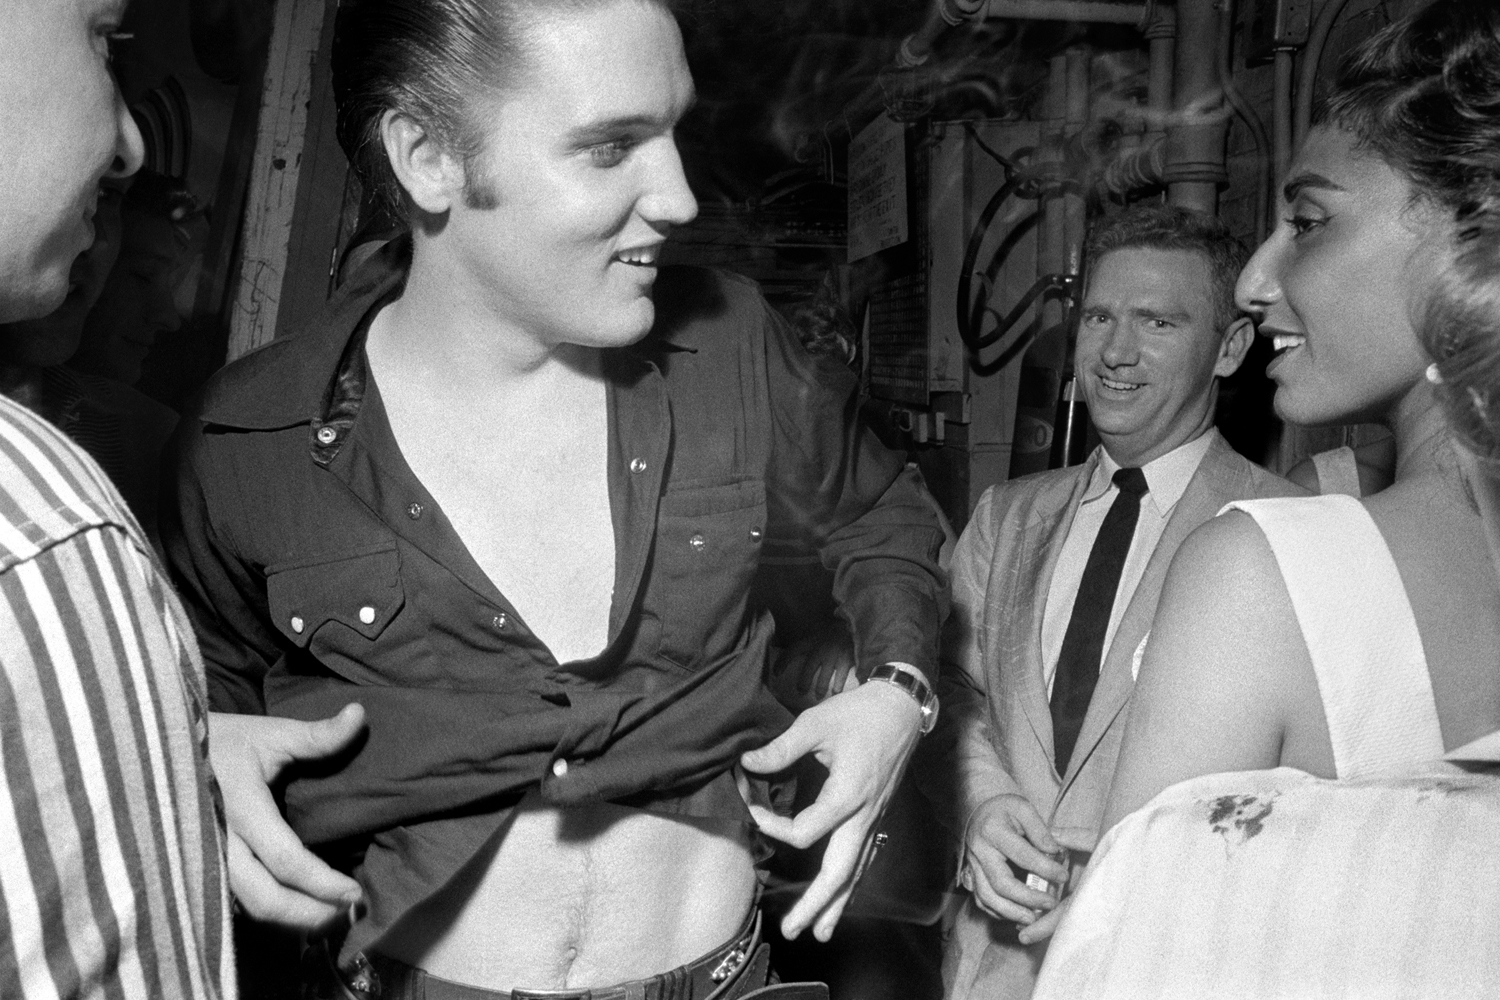 July 1, 1956. The Hudson Theatre, New York. This one was right after the Steve Allen show. Elvis is in his Tumbleweed Presley shirt. He had just played a character in a scripted piece—his first acting roll on TV—and was now getting back into civilian clothes…but then he spots this good looking girl and gets distracted. In the background is Tom Diskin (the Colonel's right hand man) who had originally been offered the deal to be Elvis' manager and turned it down.